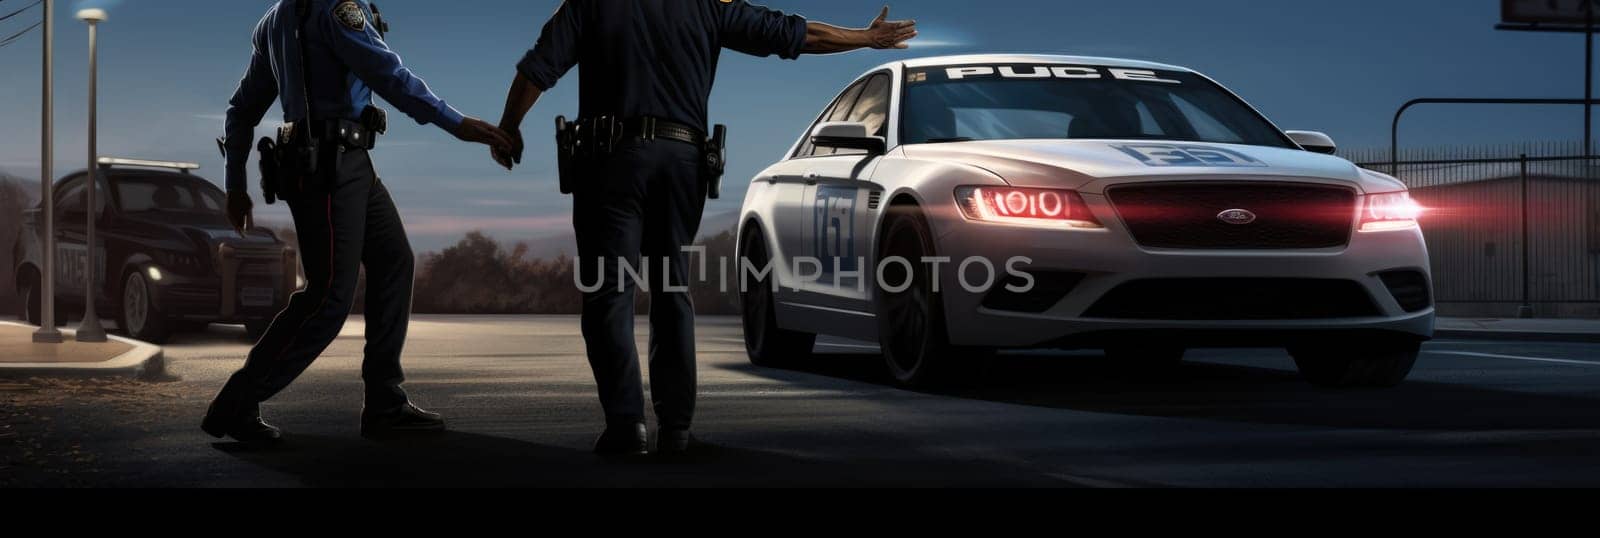 Two police officers are standing next to a police car while on duty, monitoring the surroundings.